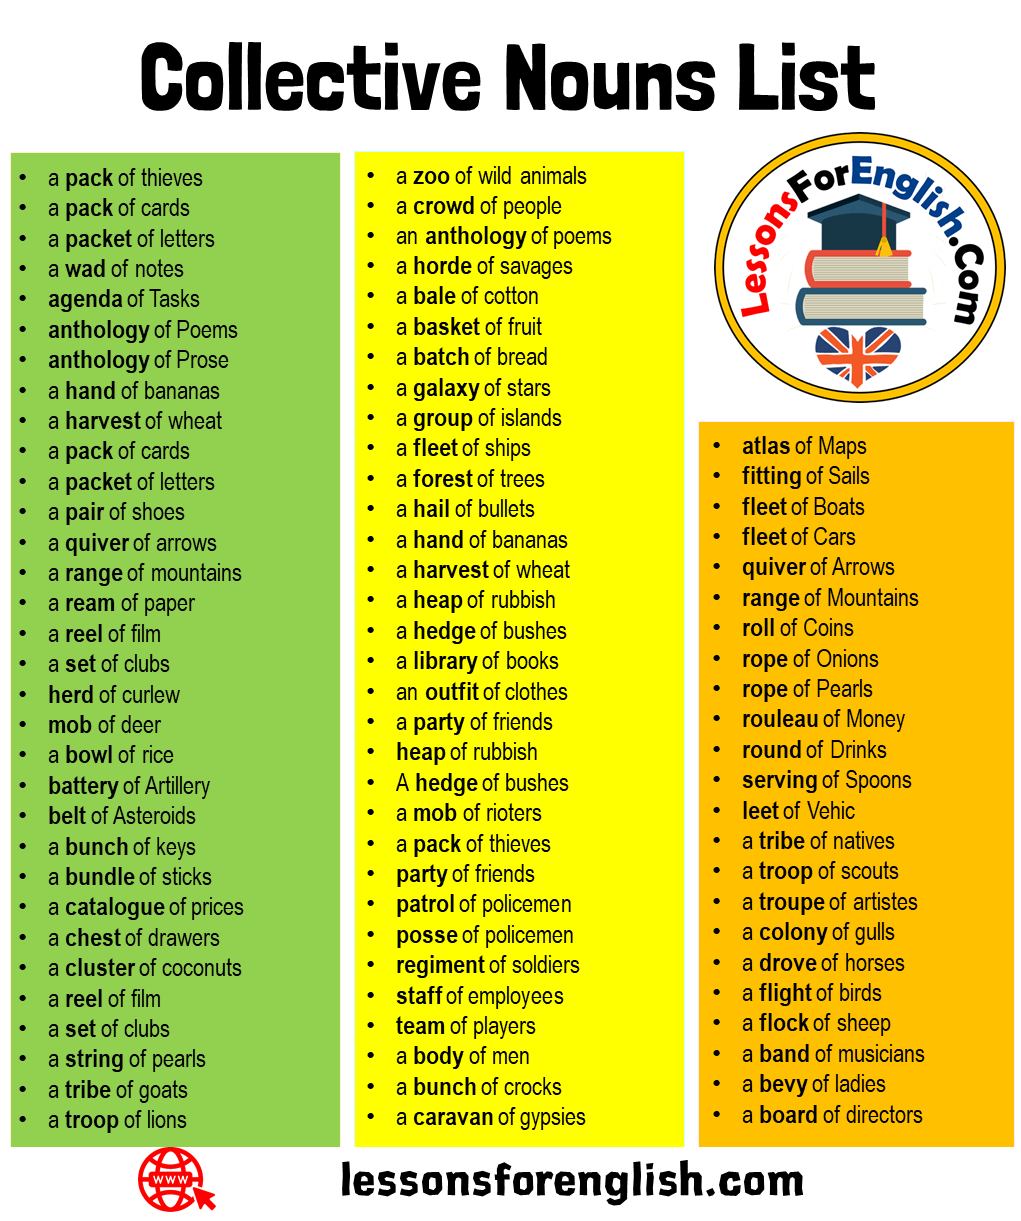 60 Collective Nouns List in English - Lessons For English